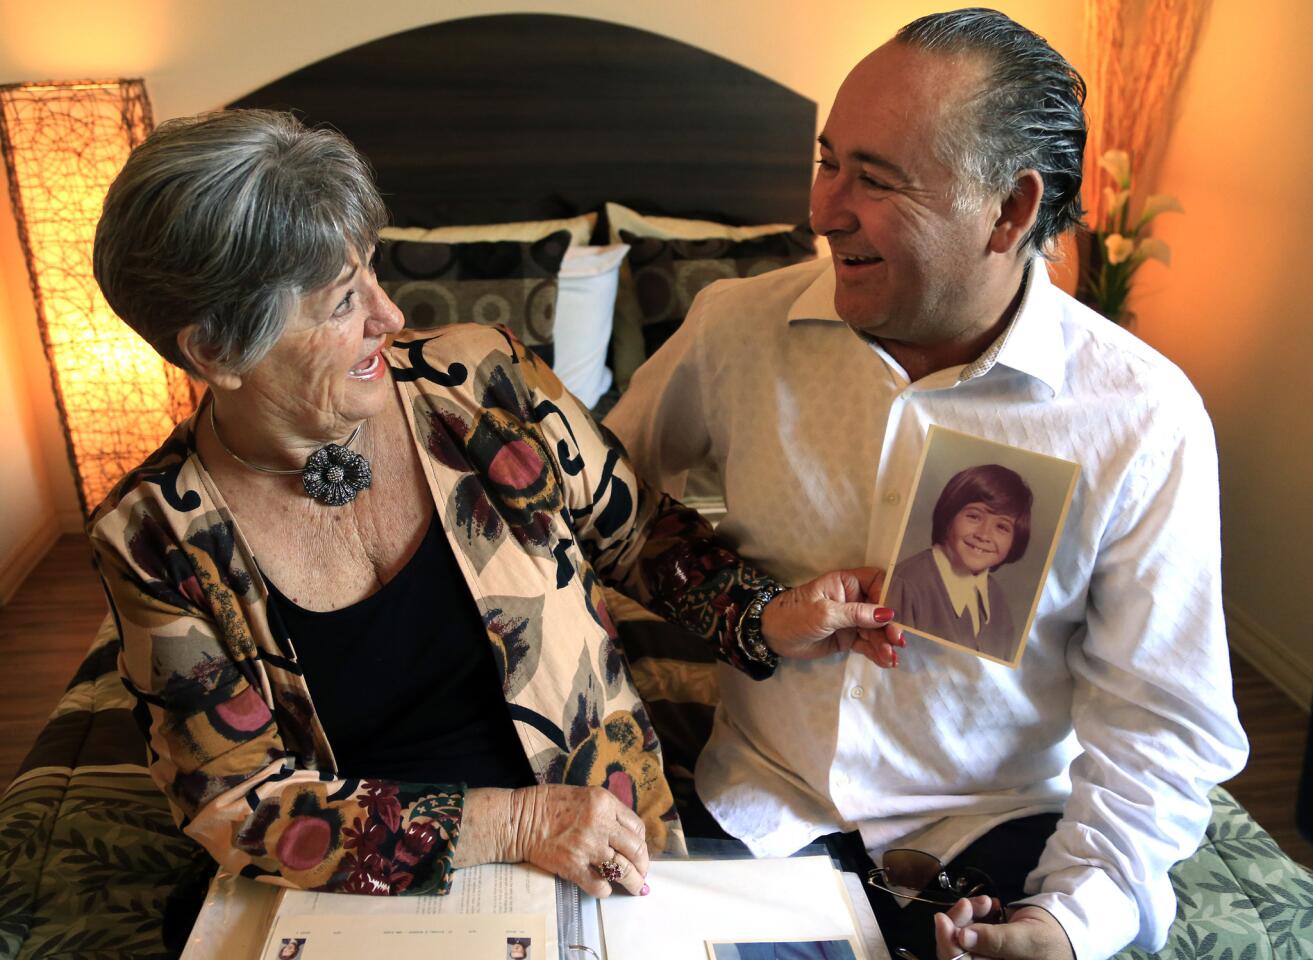 David Abeyta and his mother, Mary Schofield, look over photos of David in his youth after being reunited at SRO Housing Corp.'s Gateway Apartments in Los Angeles.